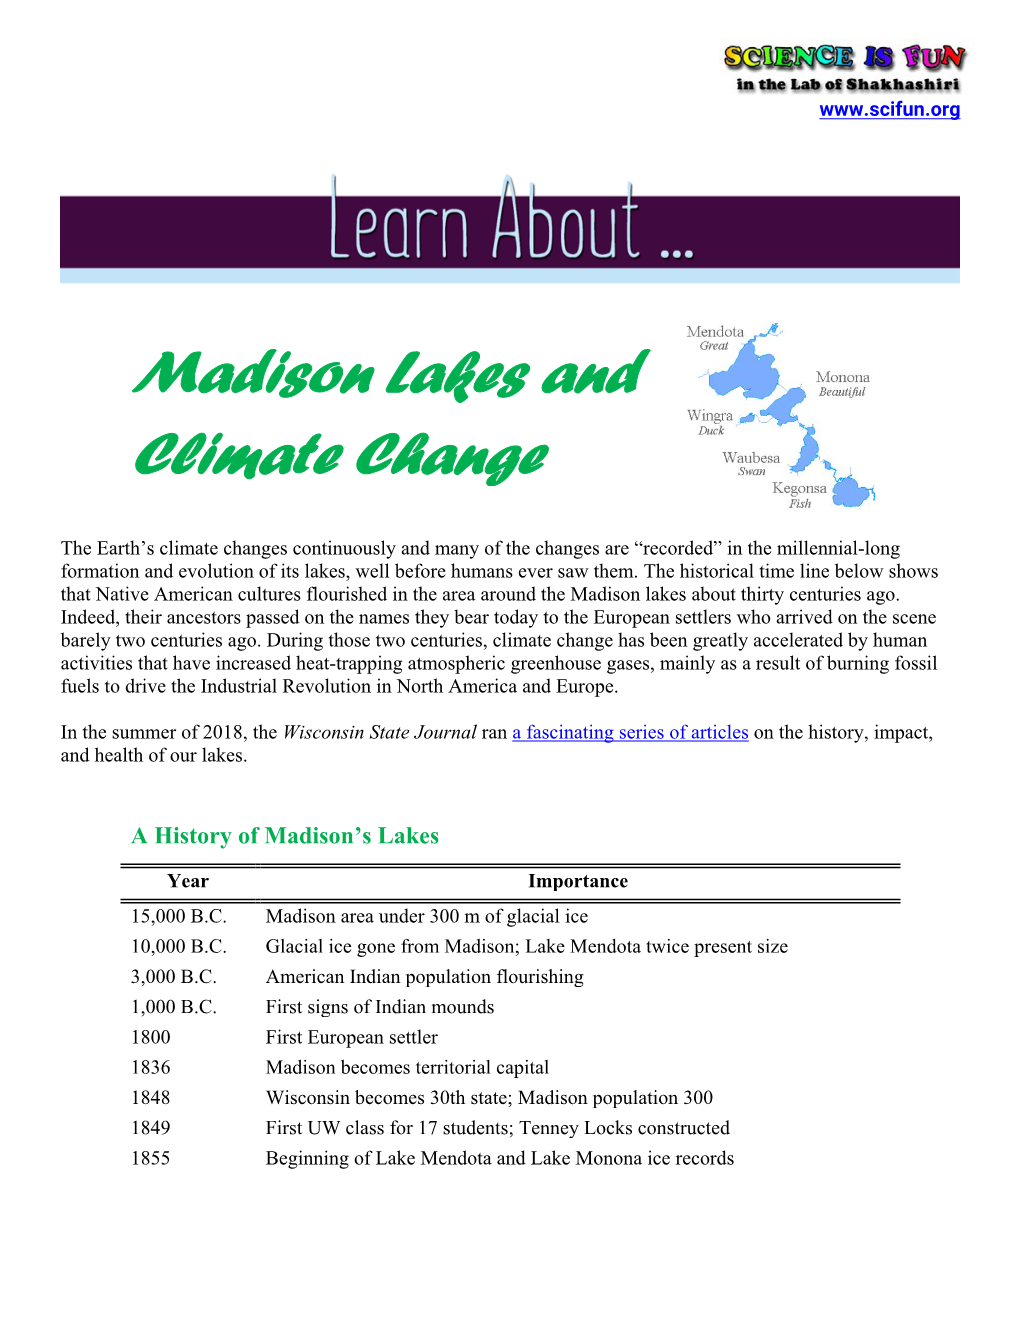 Madison Lakes and Climate Change